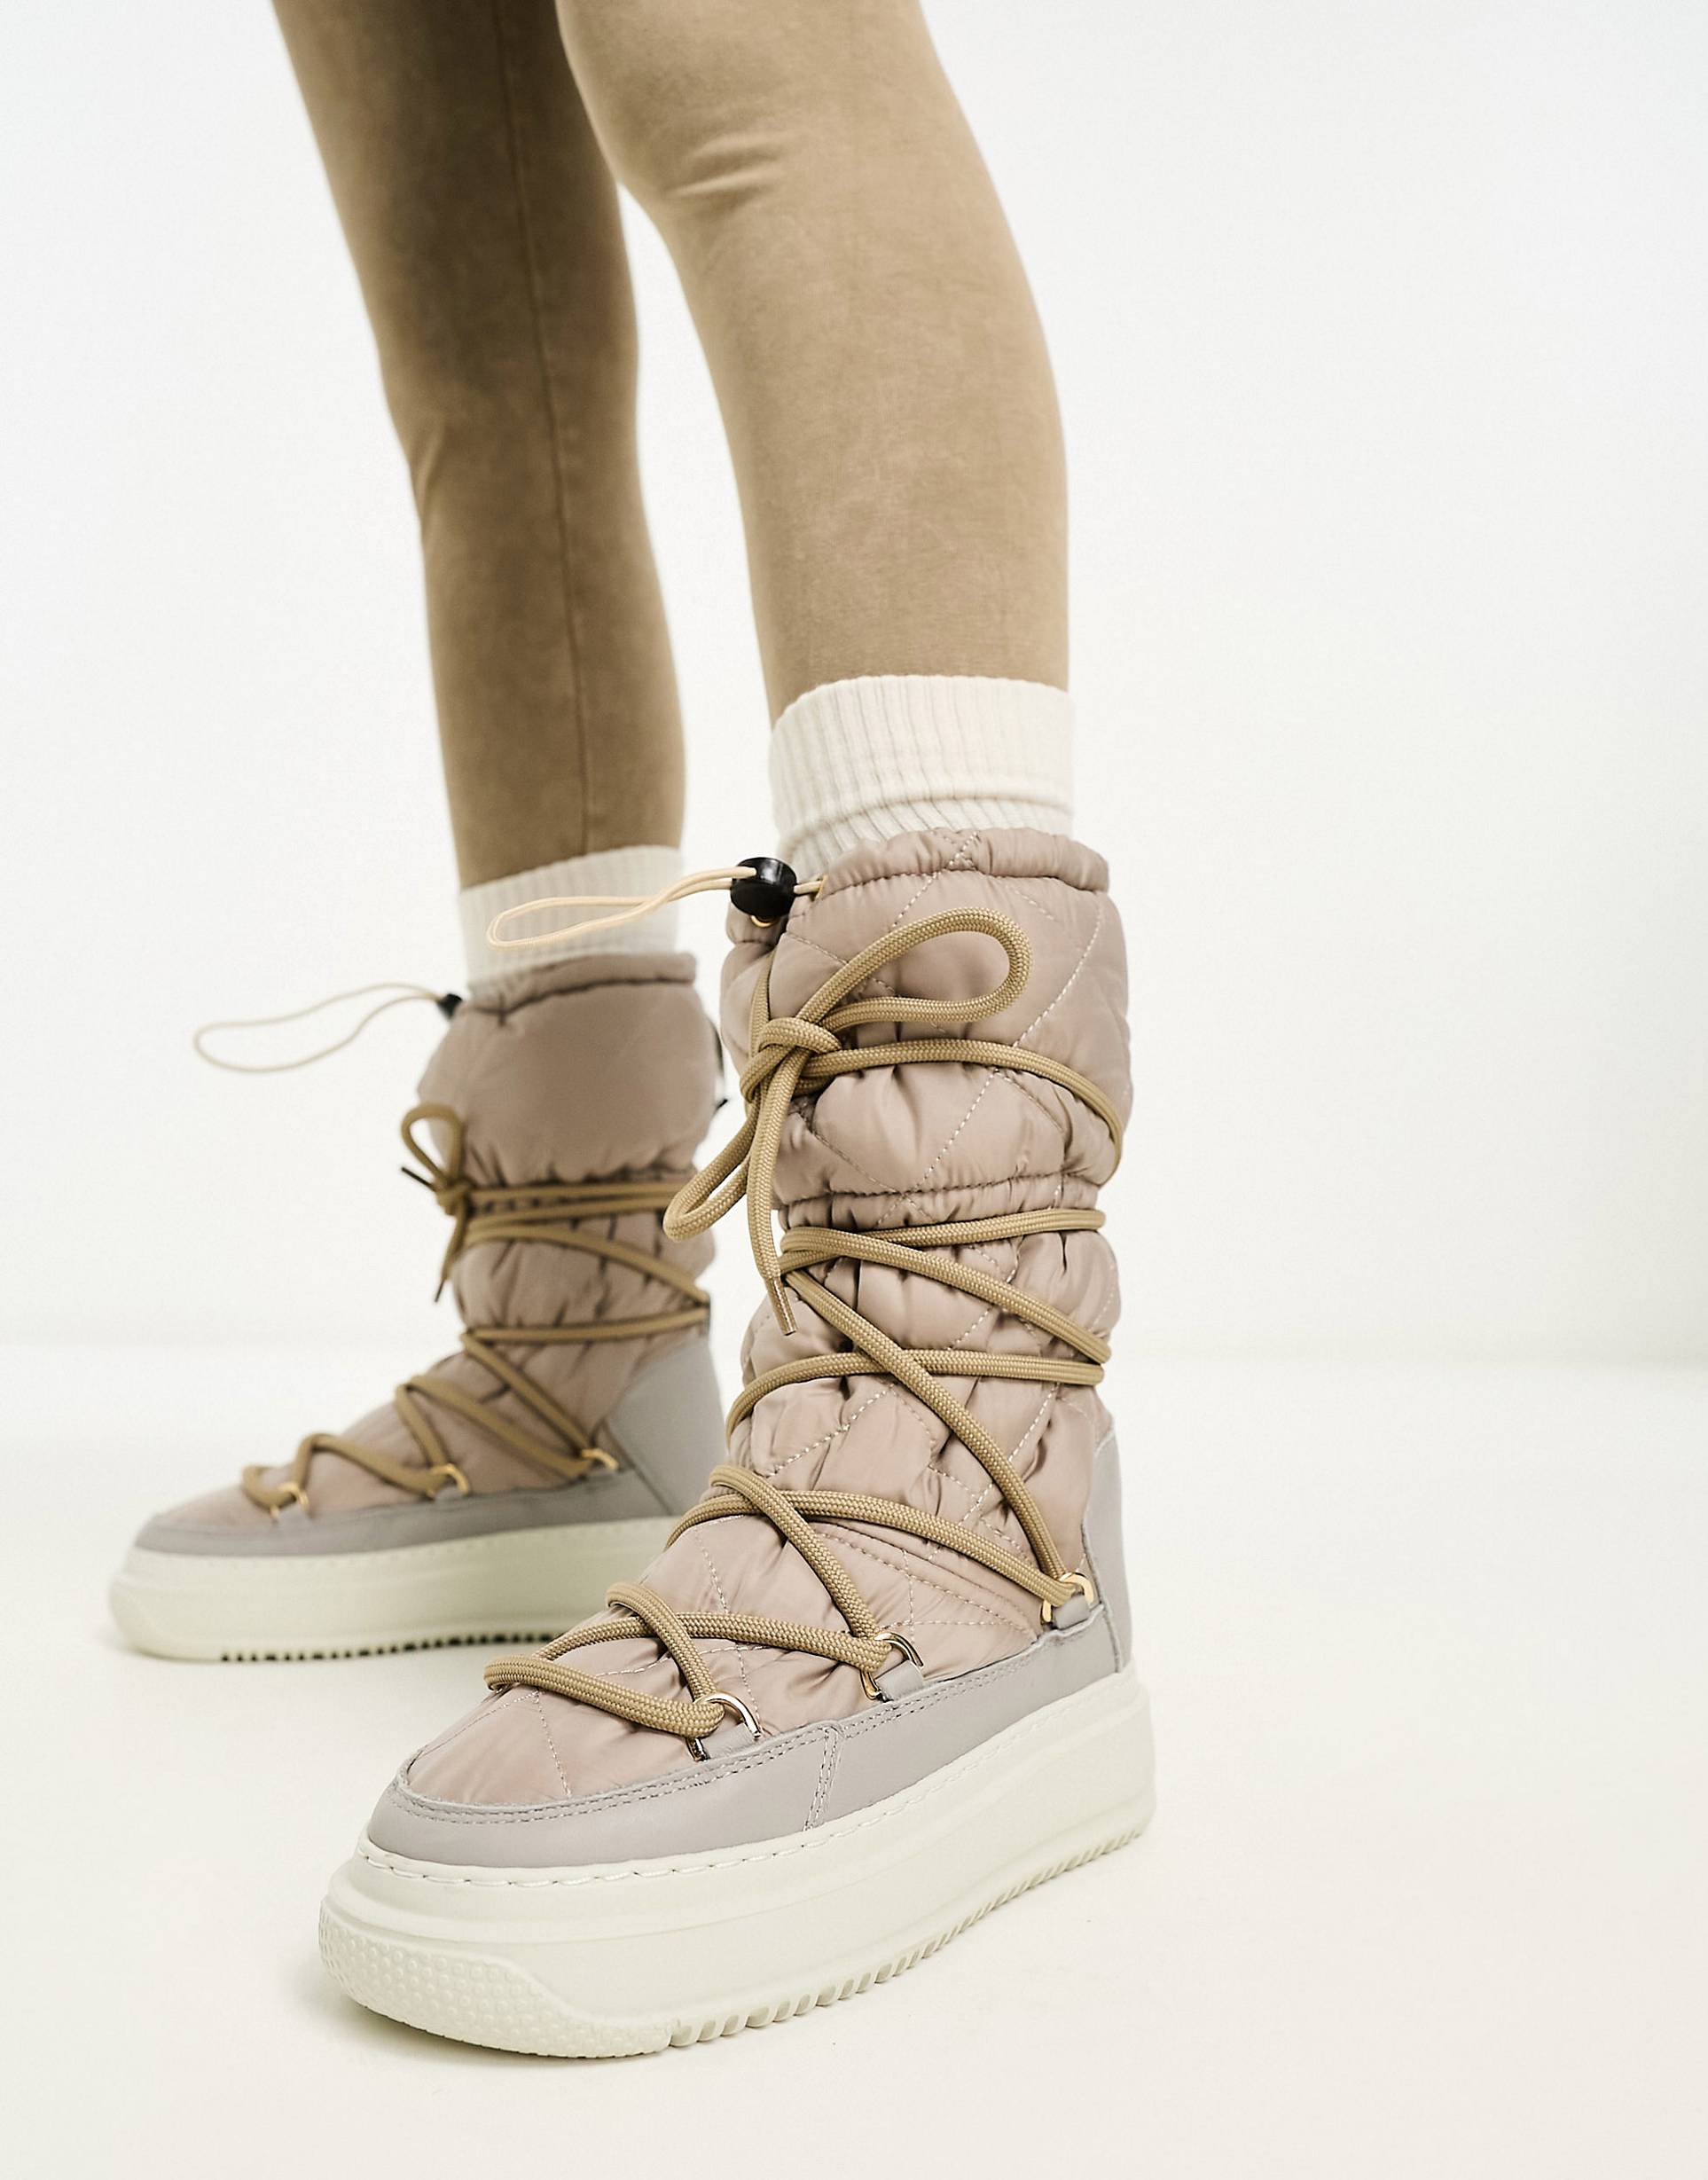 Pajar + Pajar Mid Leg Quilted Snow Boots in Beige